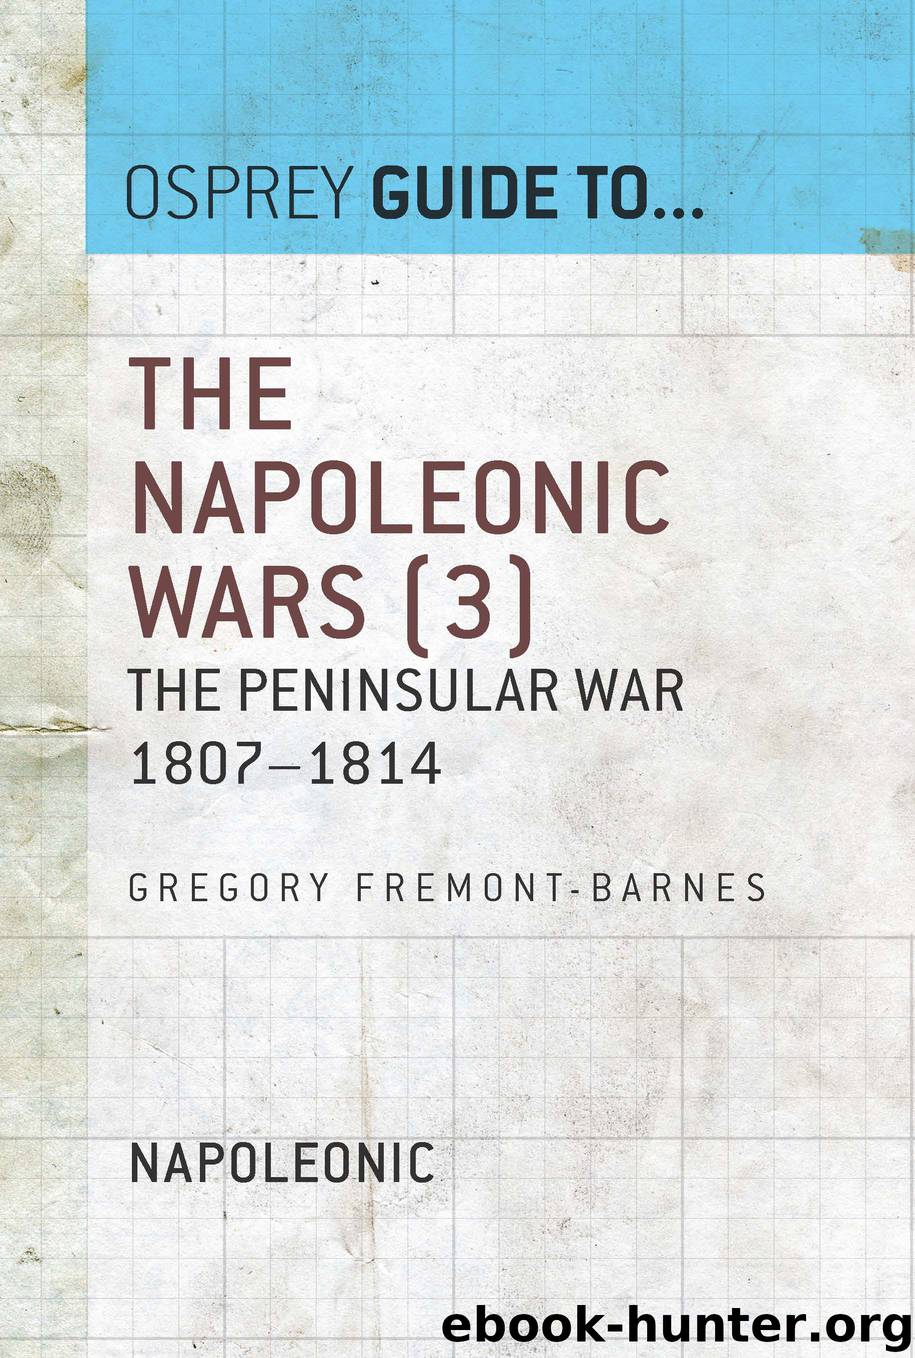 The Napoleonic Wars, Volume 3 by Gregory Fremont-Barnes